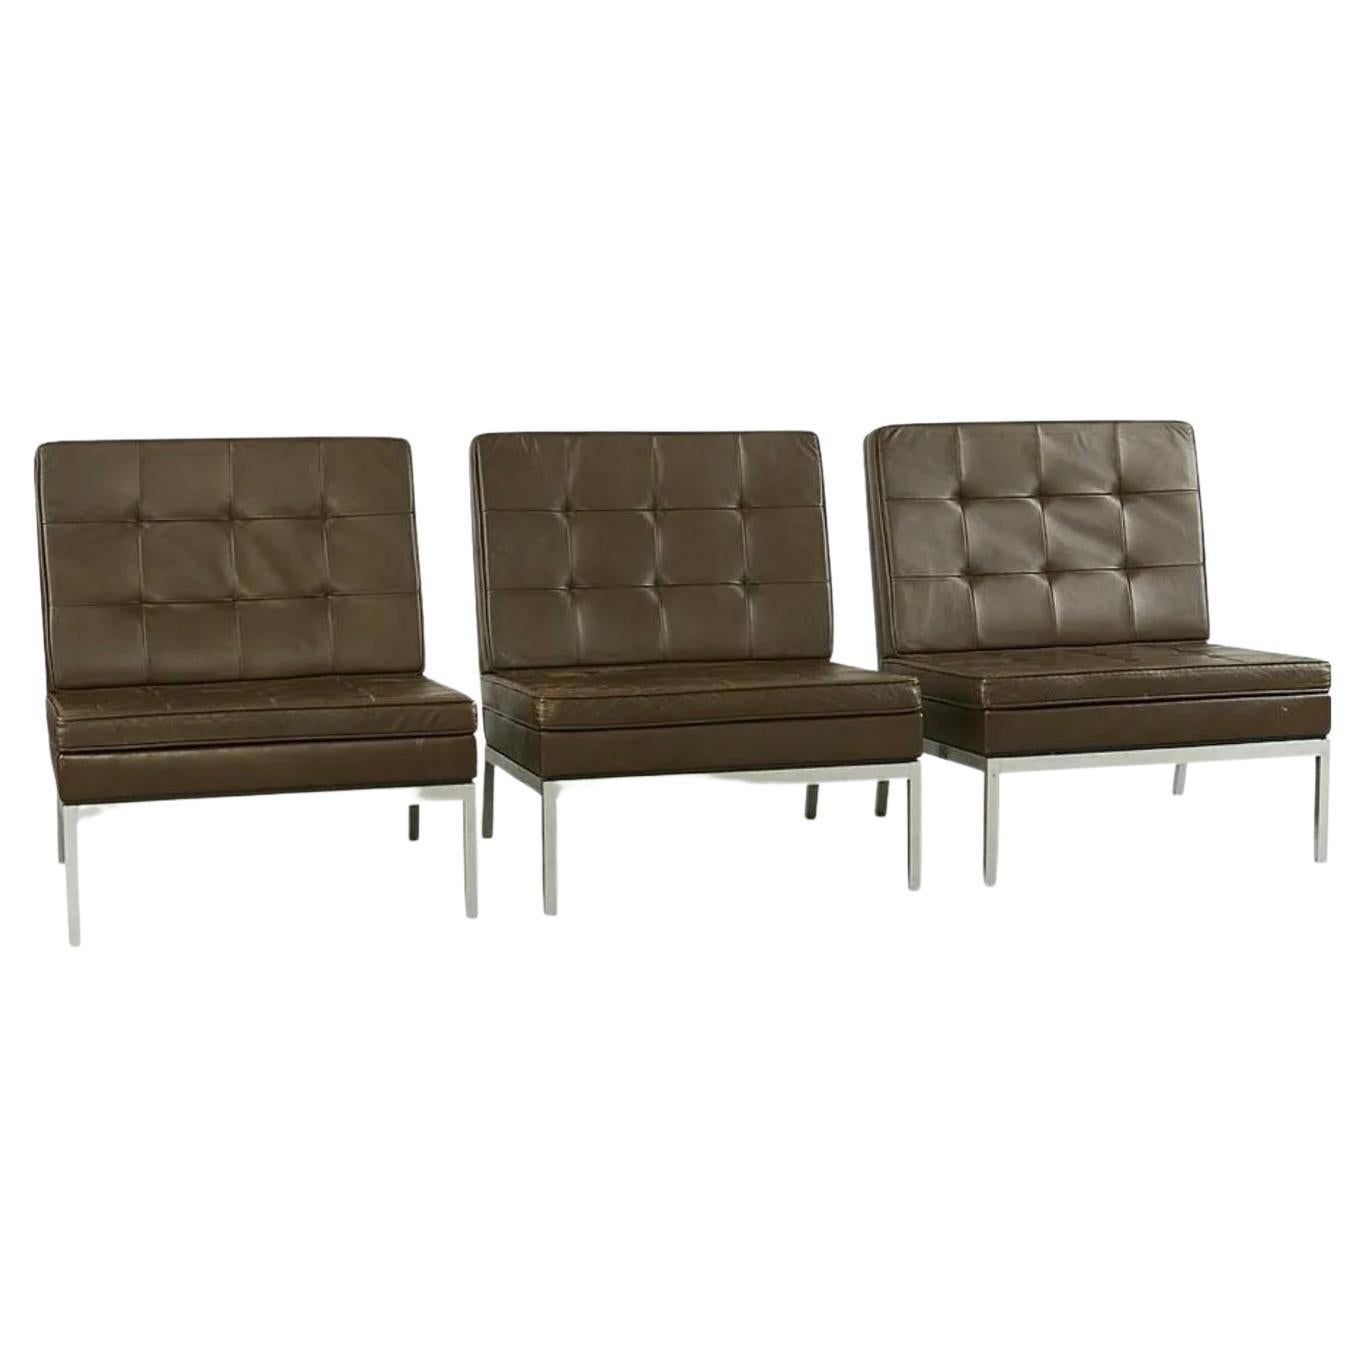 Vintage Mid Century original mid century Model 65 chairs by Florence Knoll for Knoll International. Classic great lines. The chrome bases are good shape with all original Knoll Brown Leather upholstery that is in great Vintage condition. Original